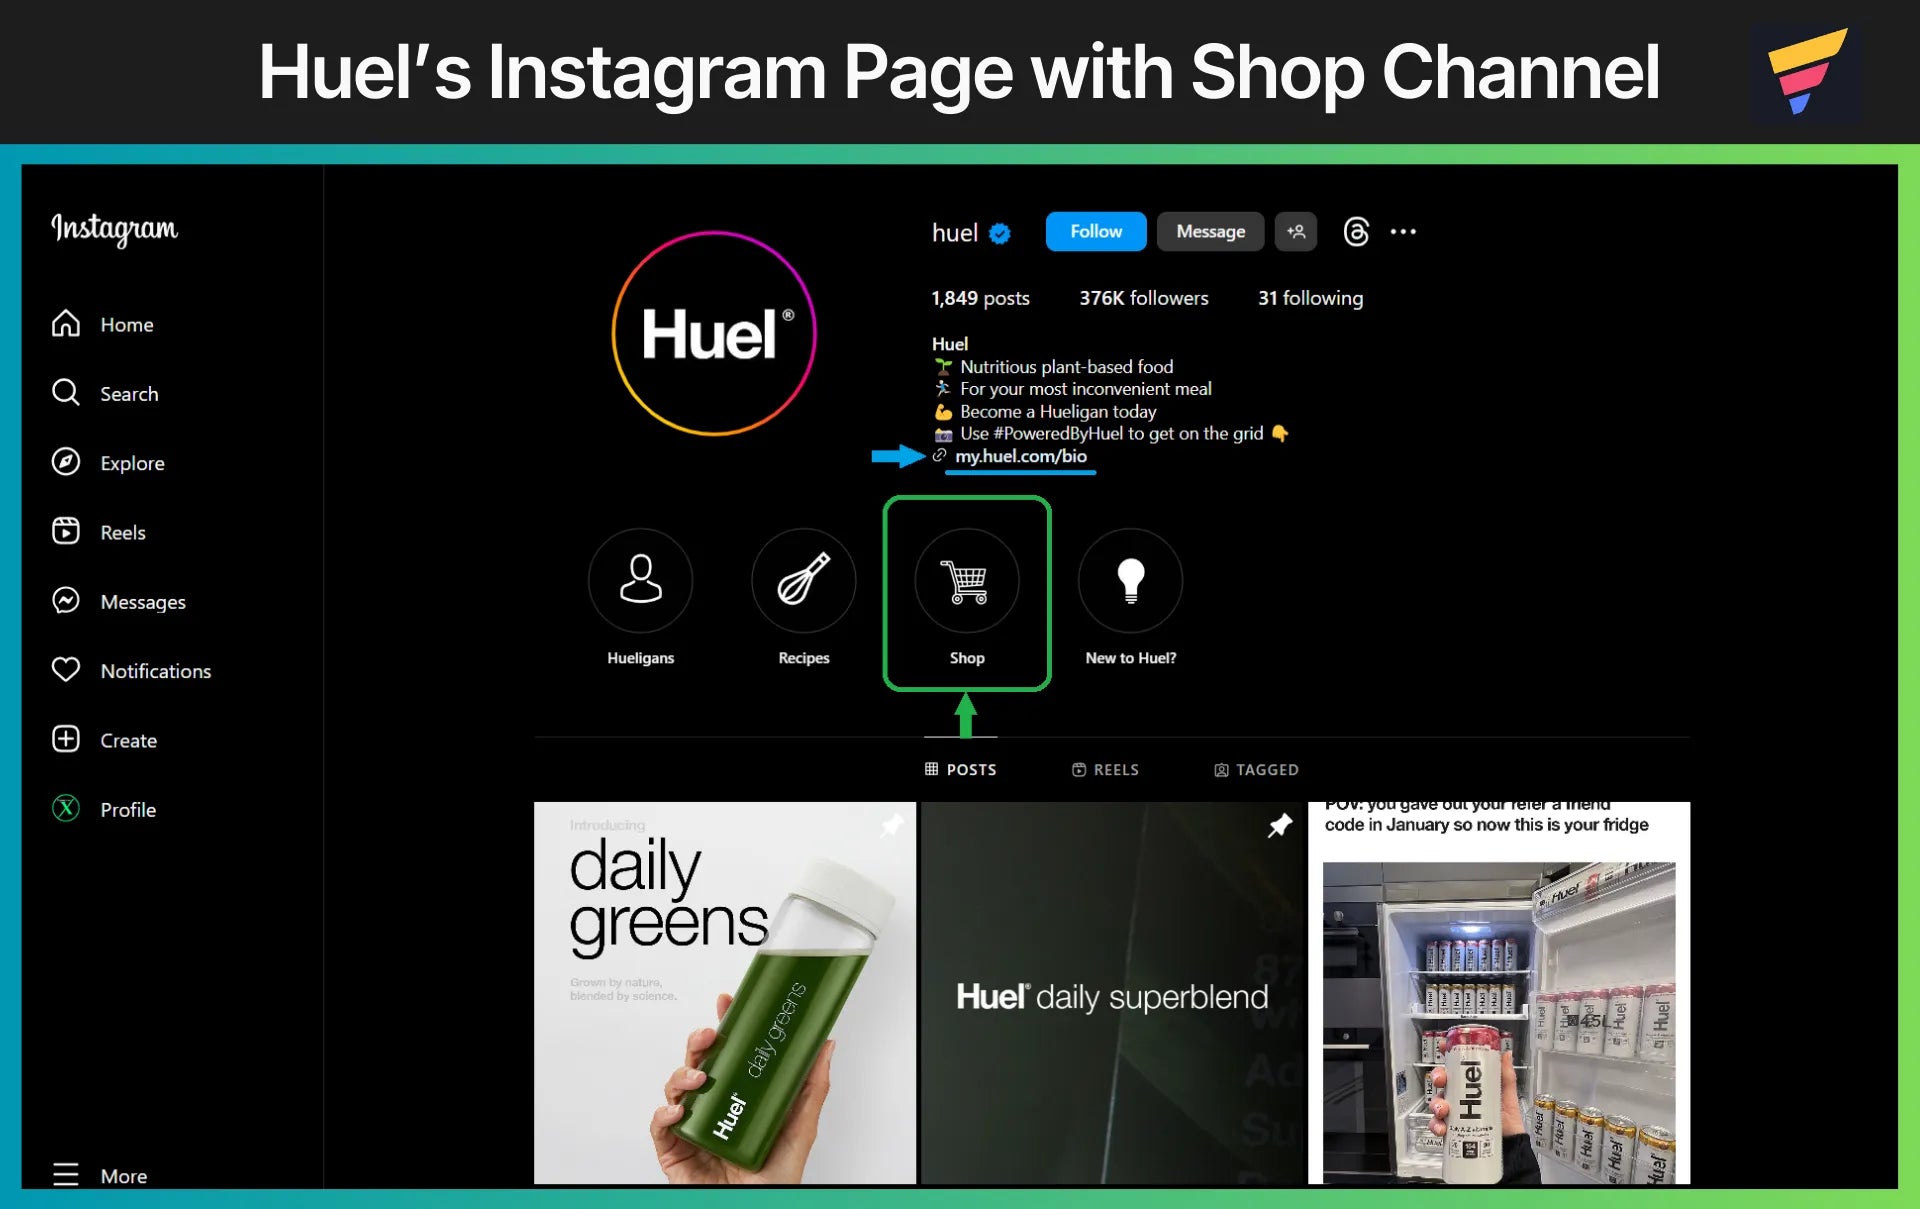 Huel’s Instagram Page with Shop Channel